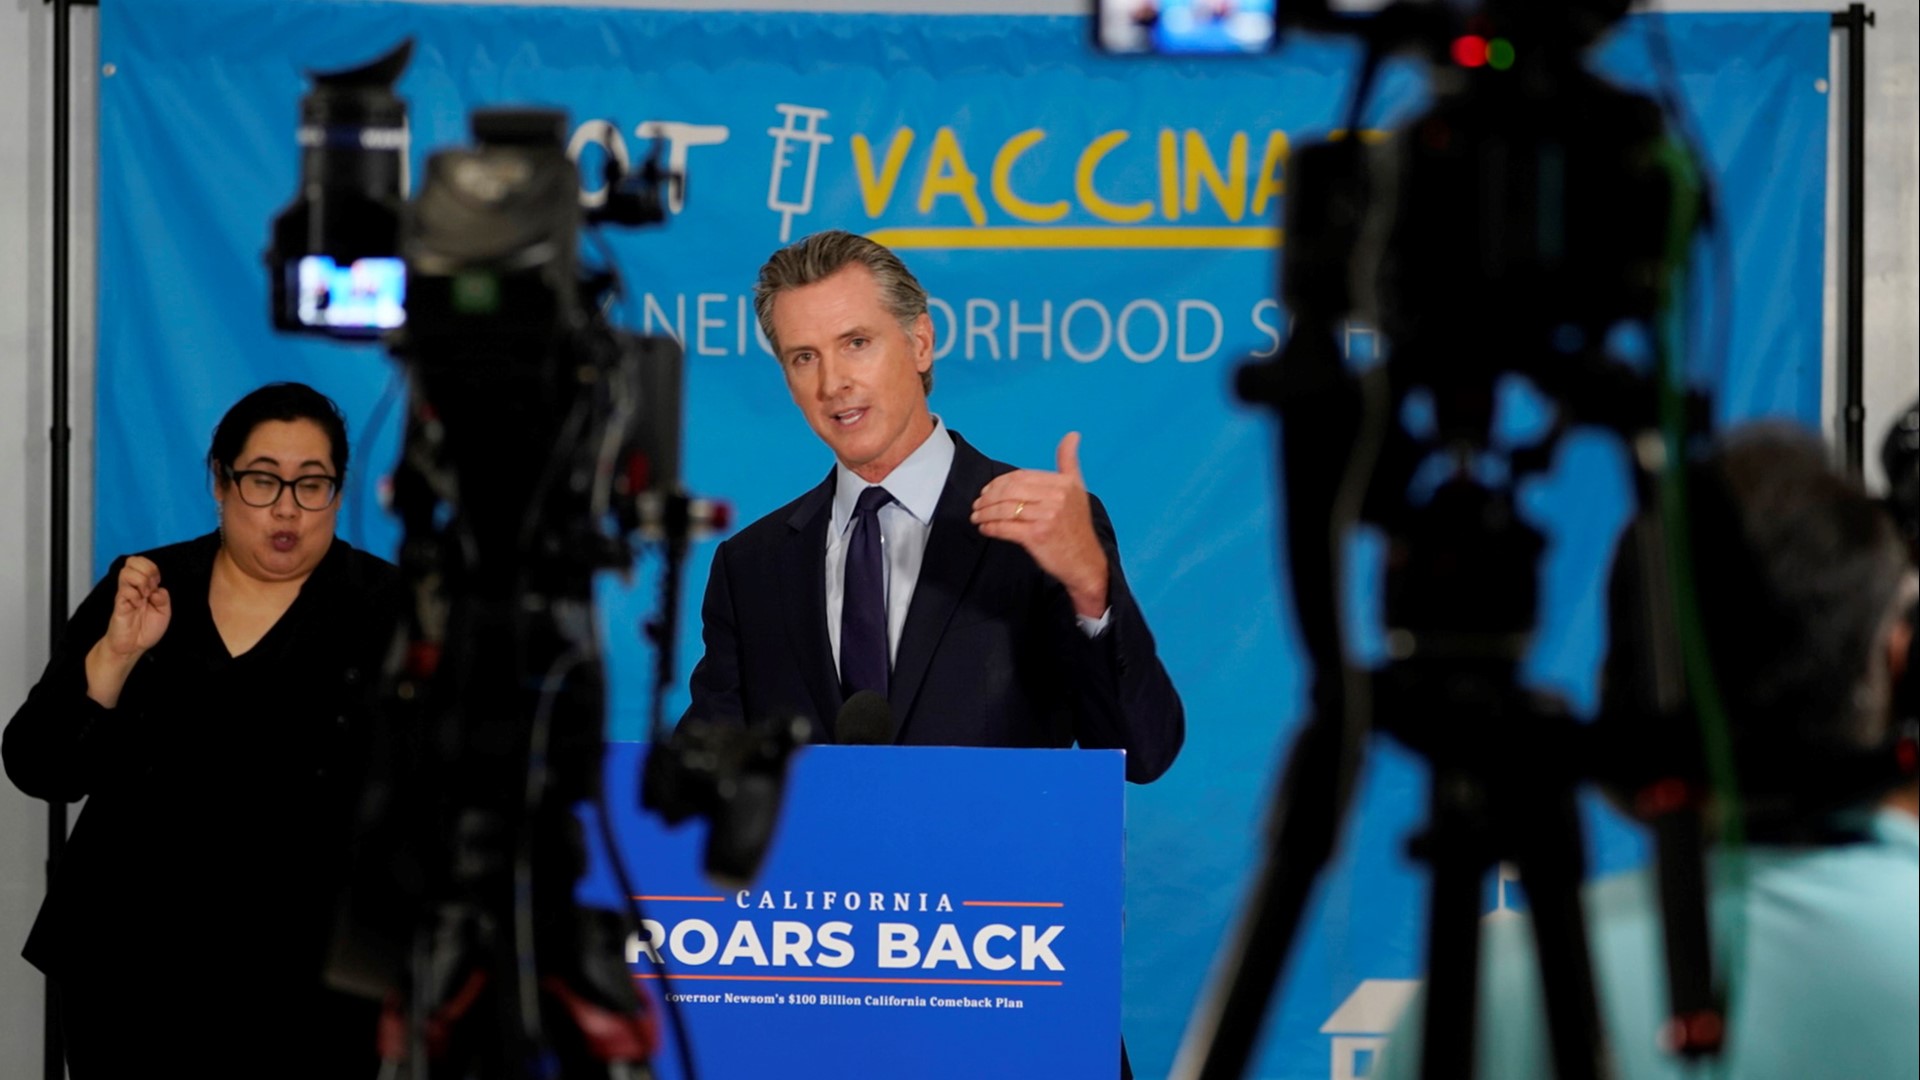 The “Vax for the Win” vaccine incentive program is made possible with $116.5 million from Gov. Gavin Newsom’s $110 Billion California Comeback Plan.